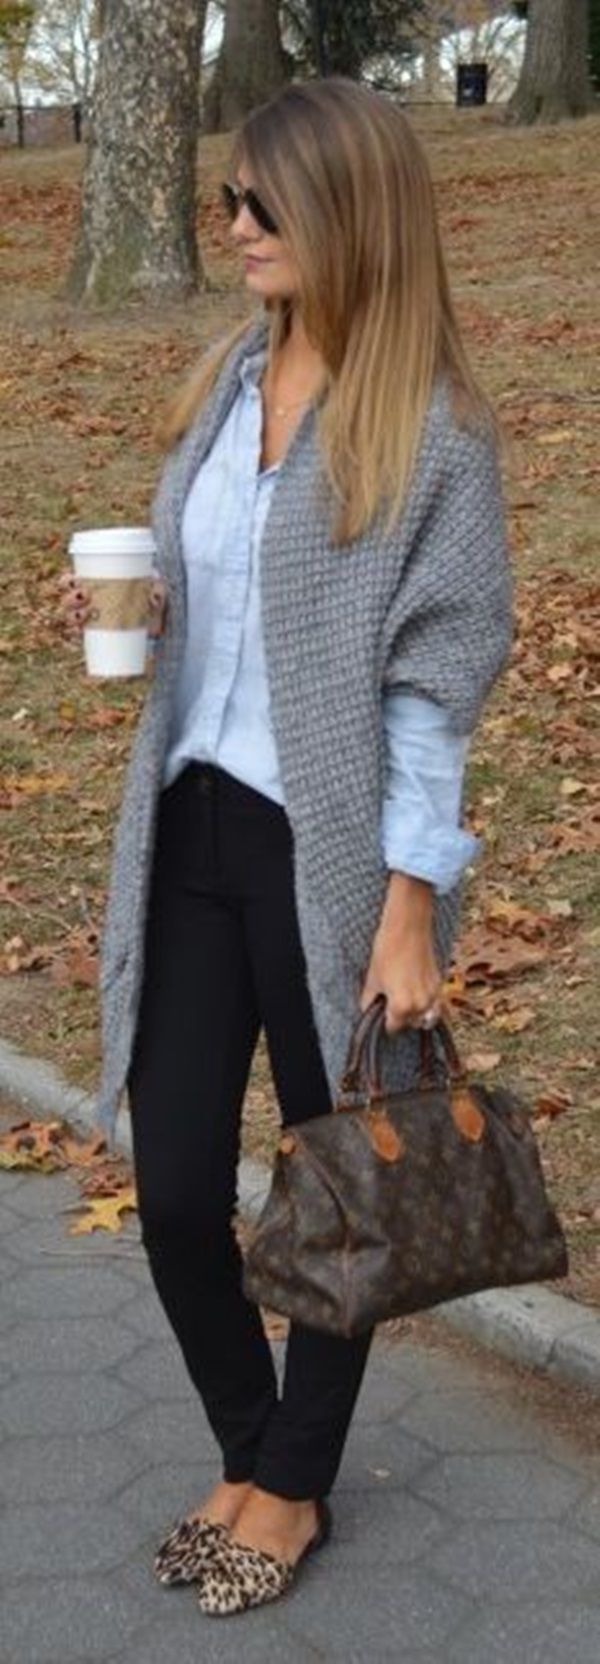 I would wear this all the time through Autumn/Winter. Just a perfect casual outfit!